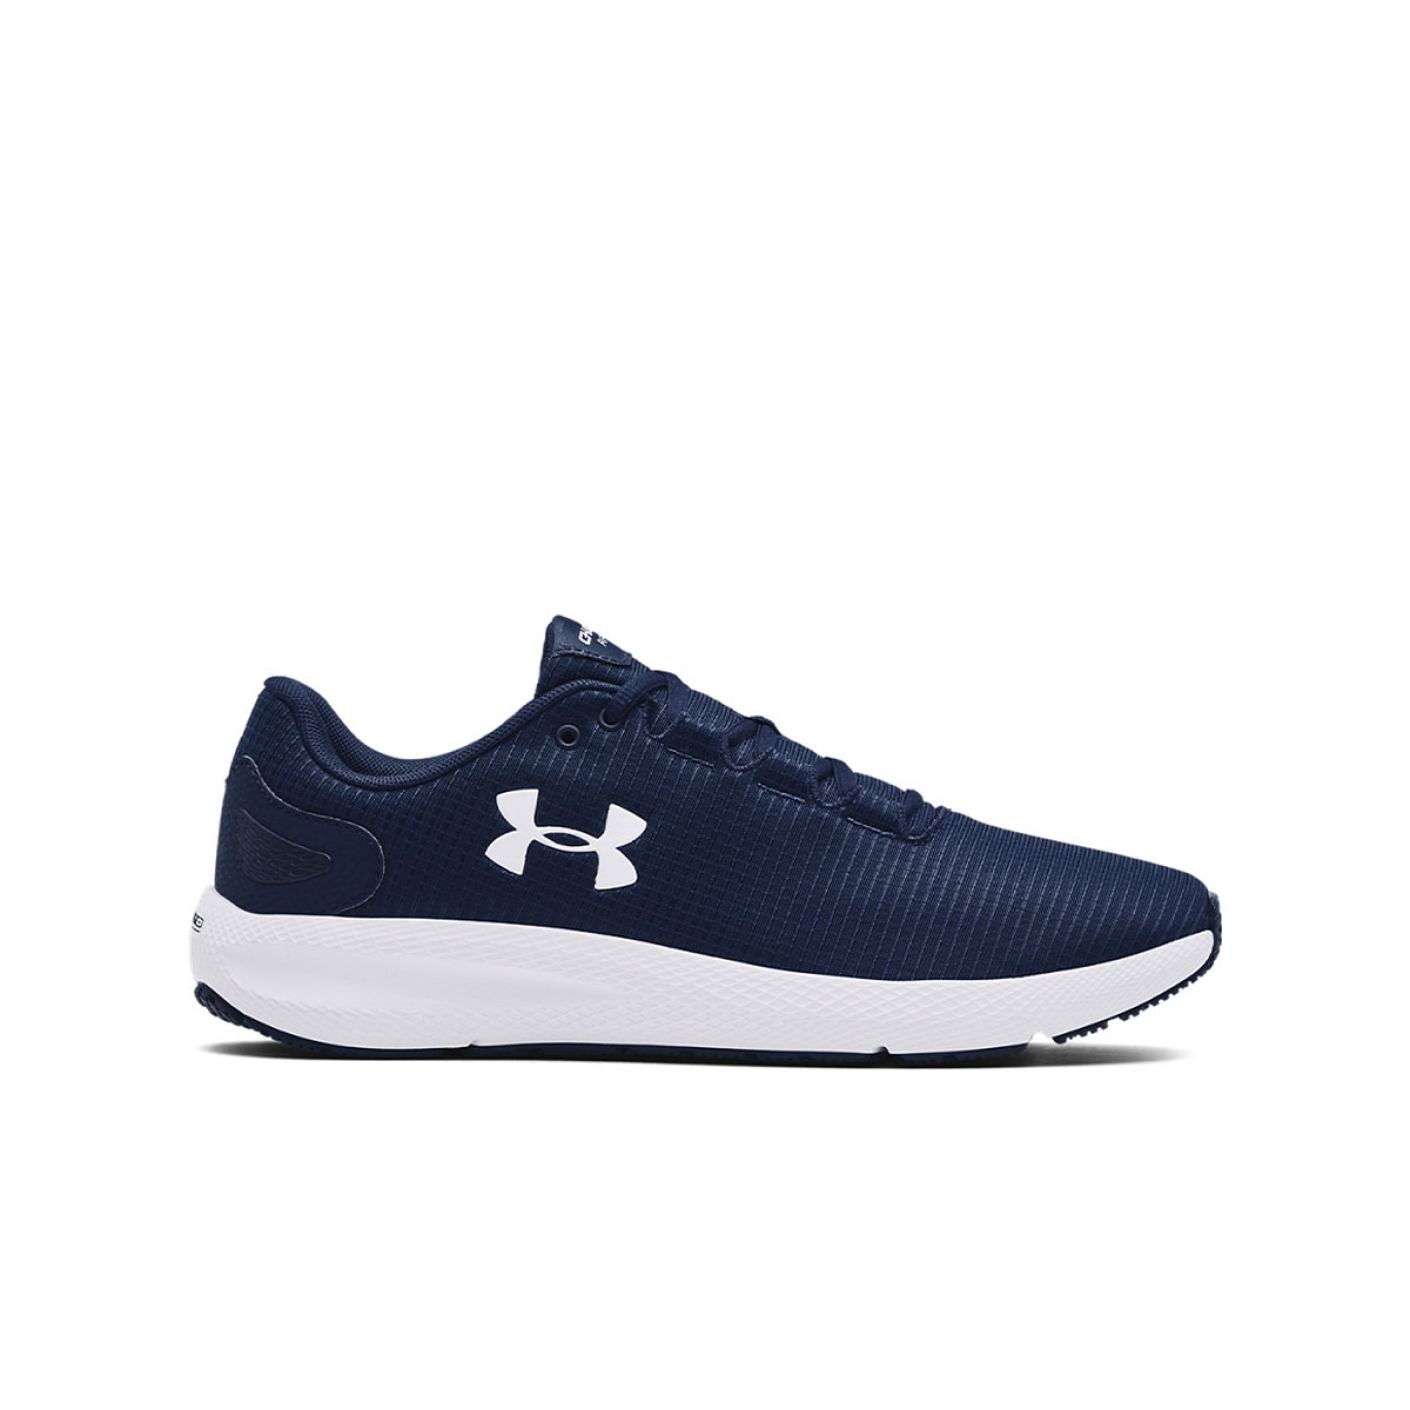 Under Armour Charged Pursuit 2 Ripstop Blue-White